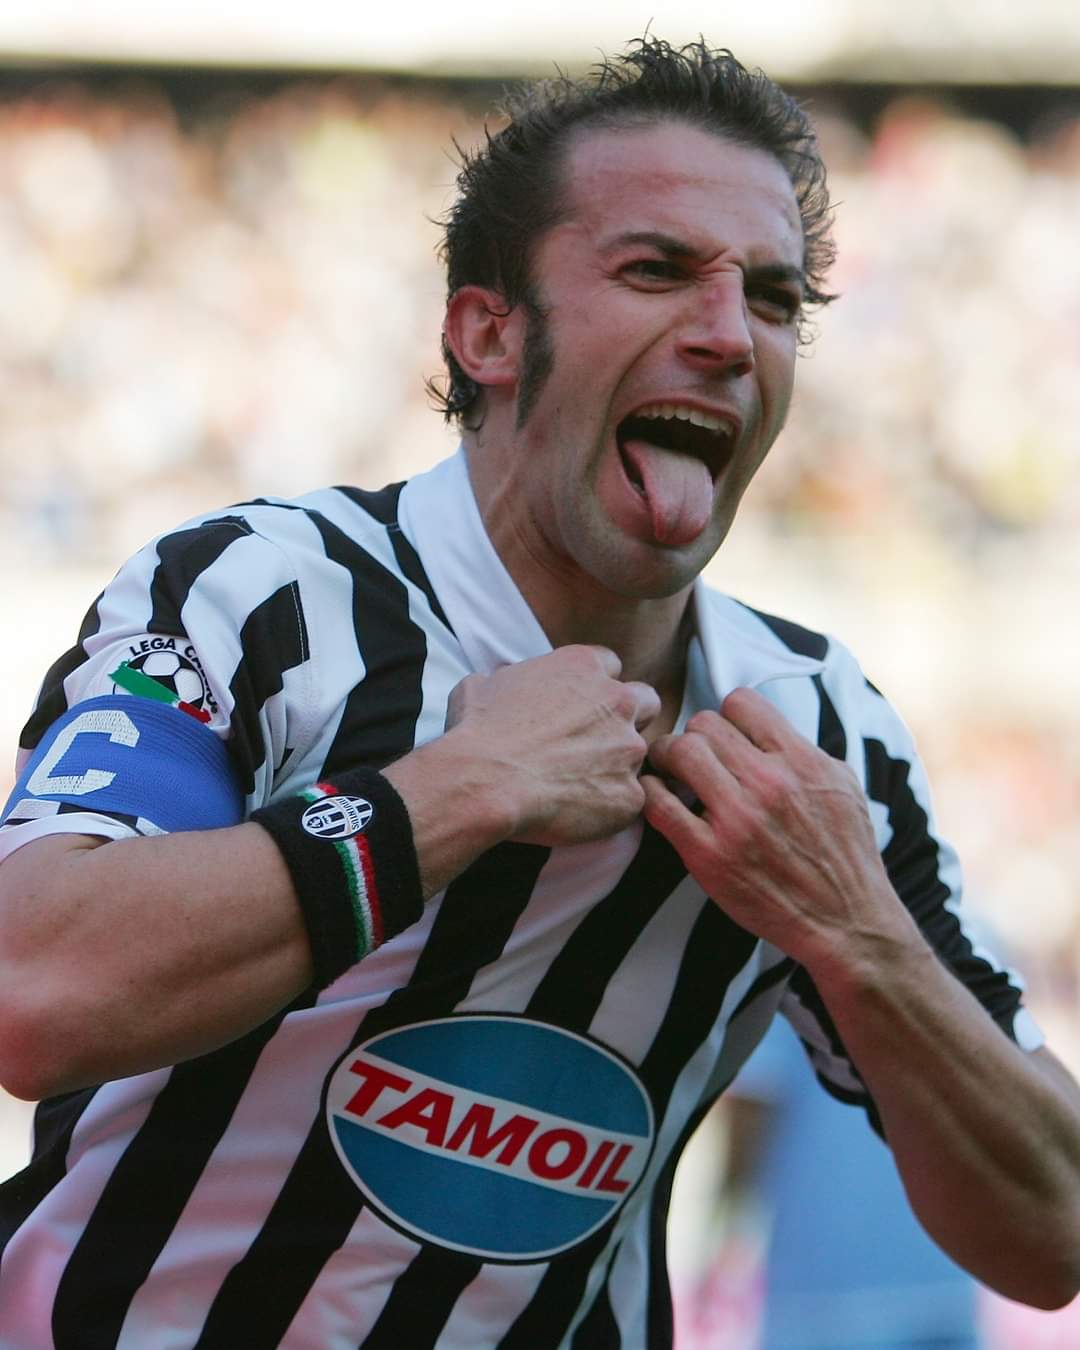 Happy birthday Alessandro Del Piero

The Best of All Time at Juventus

Forever proud of you 